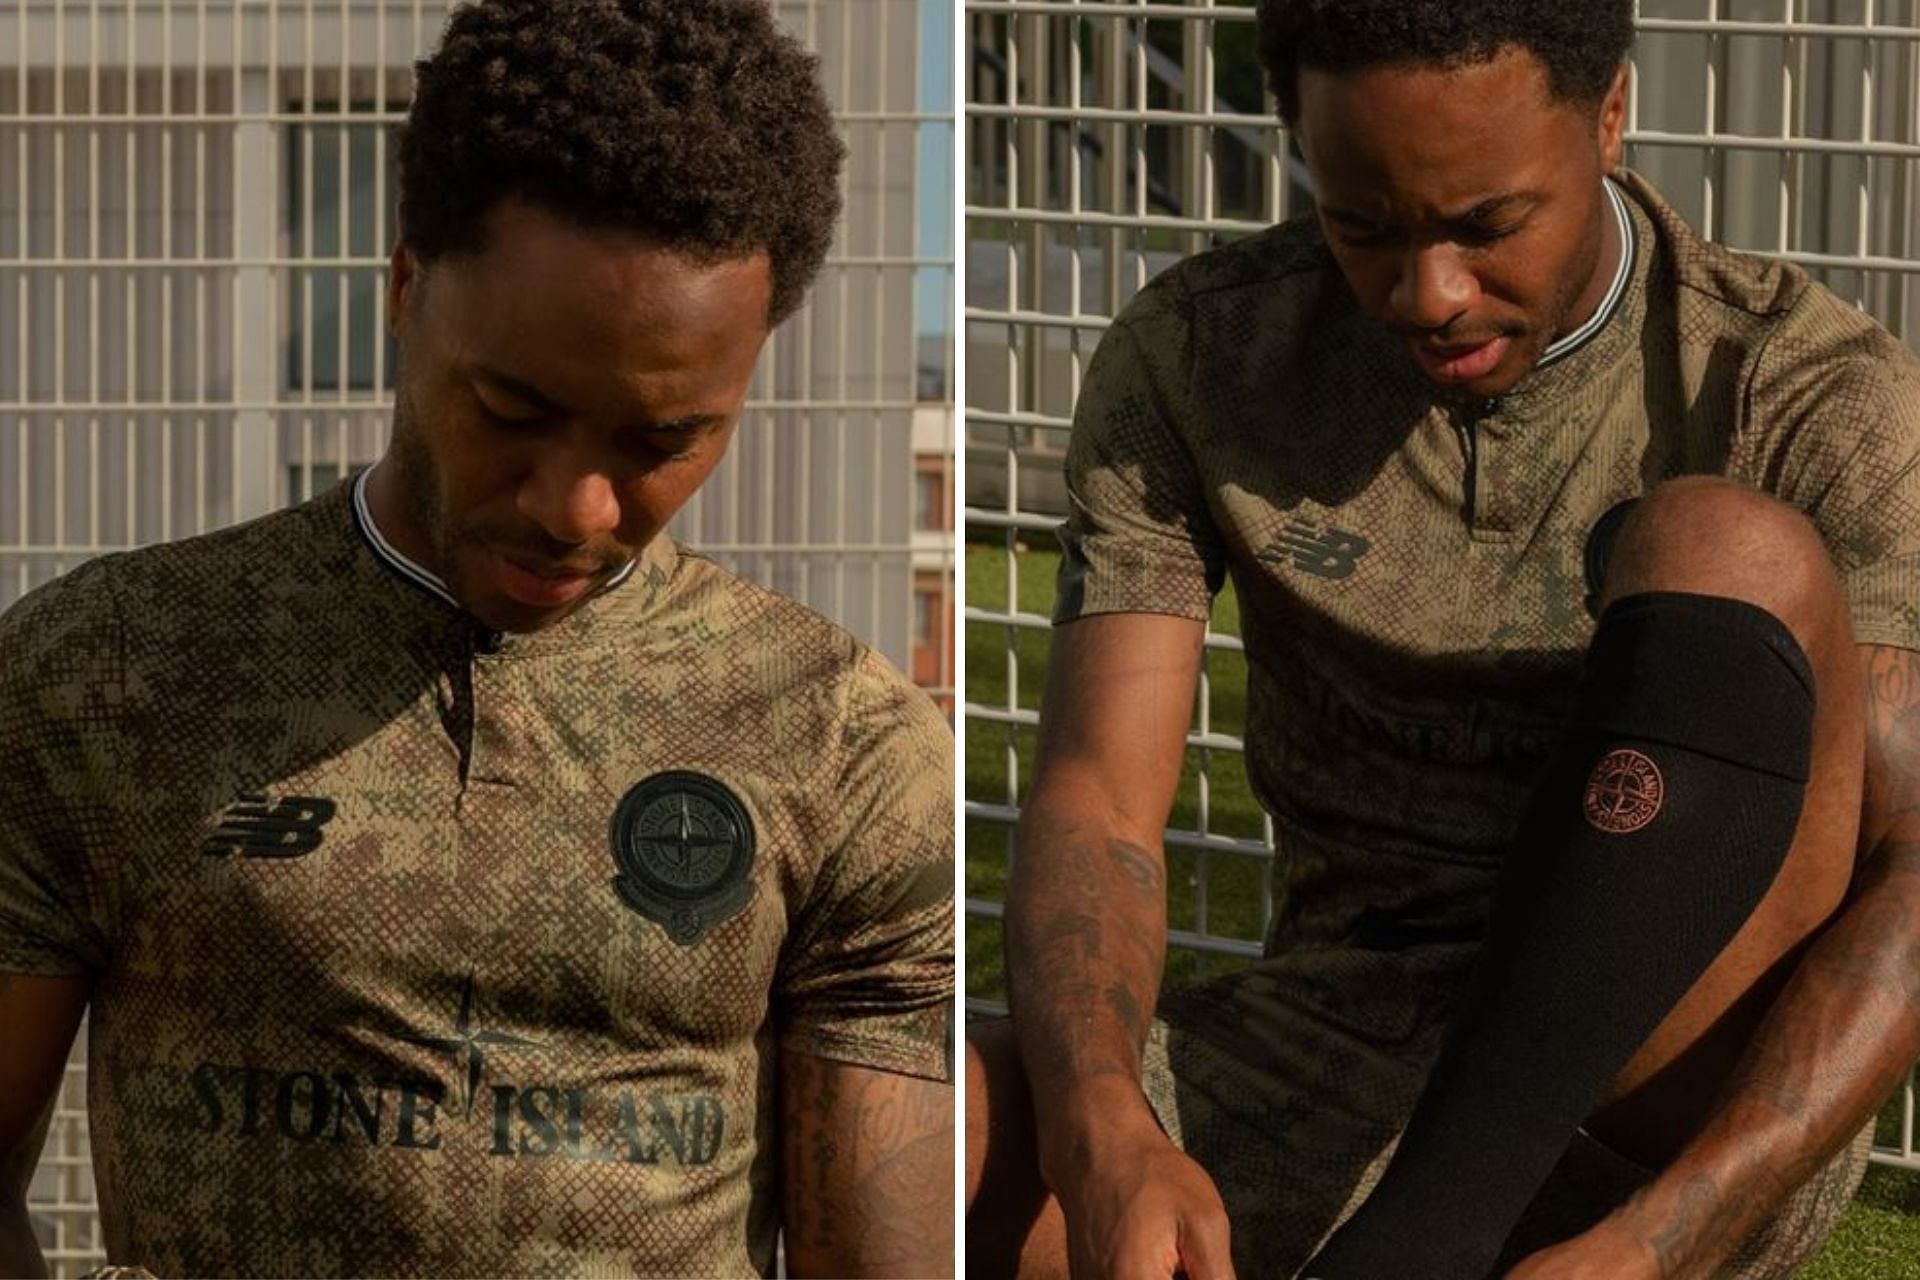 NEW BALANCE AND STONE ISLAND COLLABORATE FOR FIRST EVER FOOTBALL COLLECTION